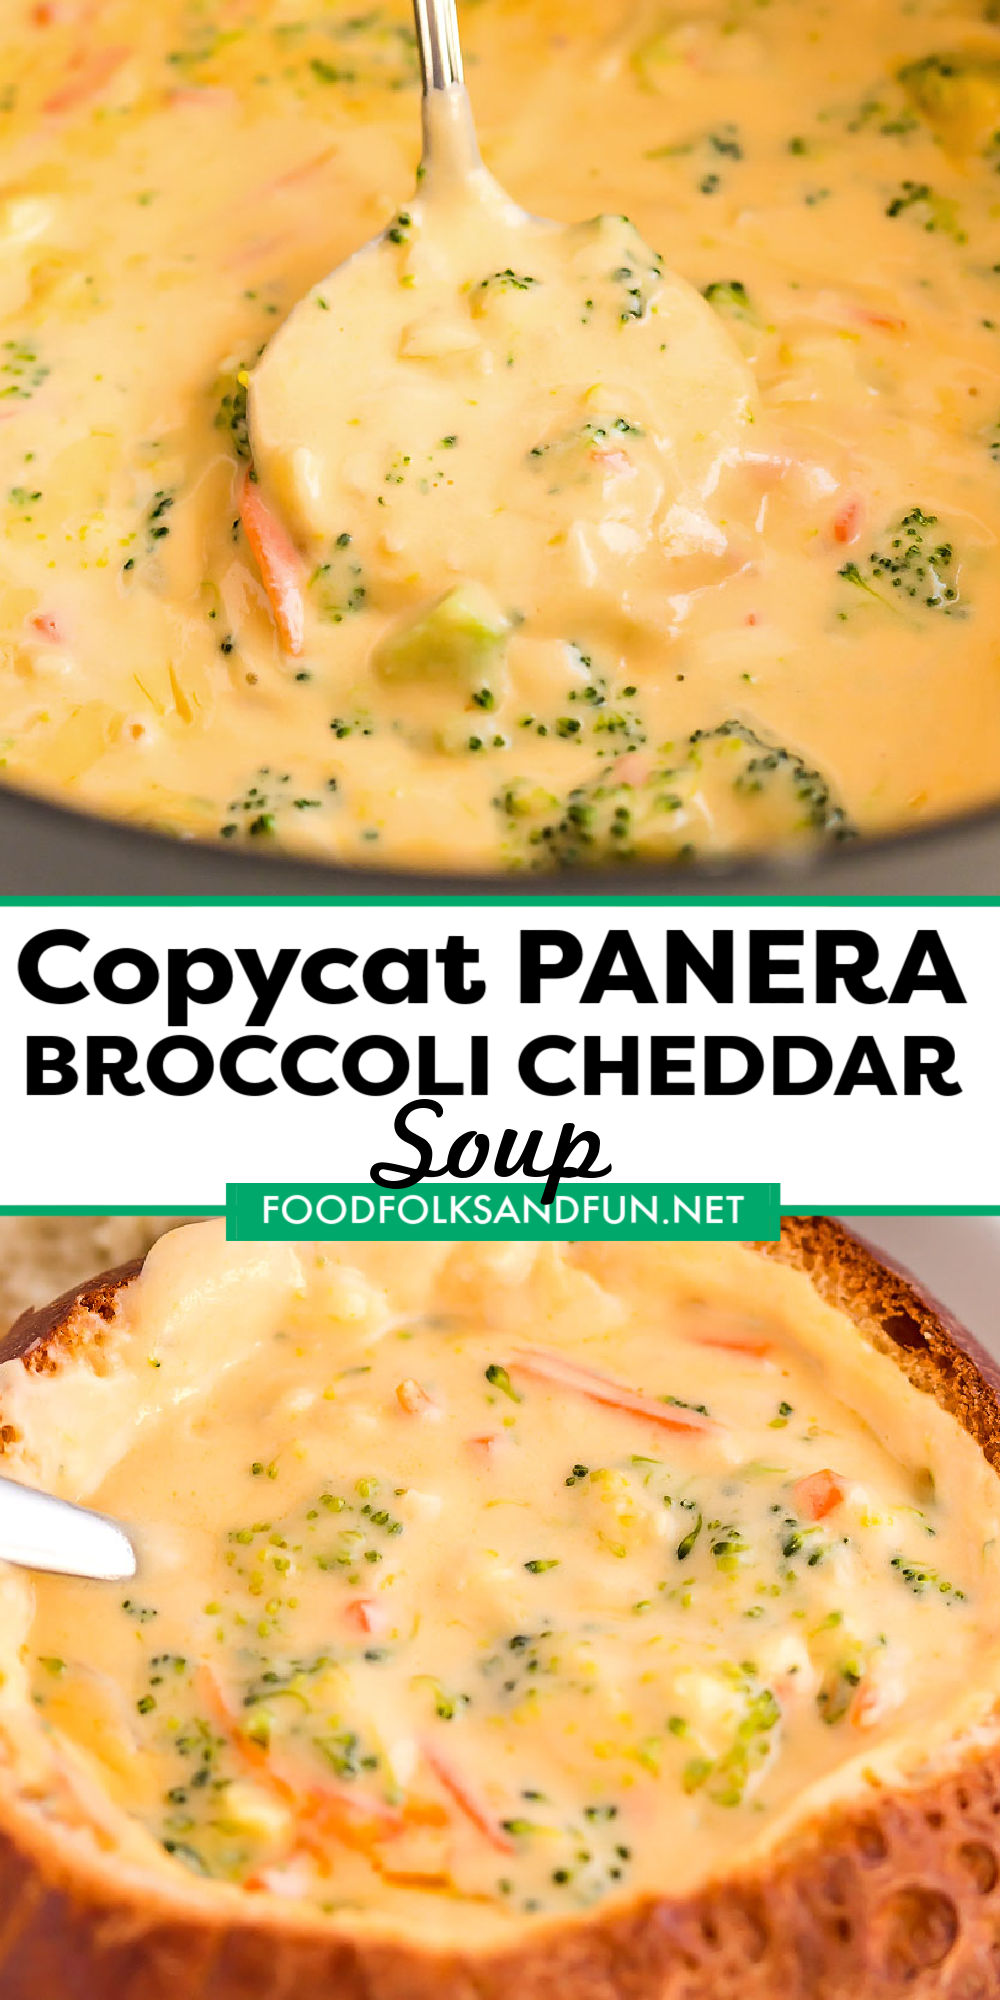 This Copycat Panera Broccoli Cheese Soup recipe tastes just like the original! Save money by making this soup at home! via @foodfolksandfun